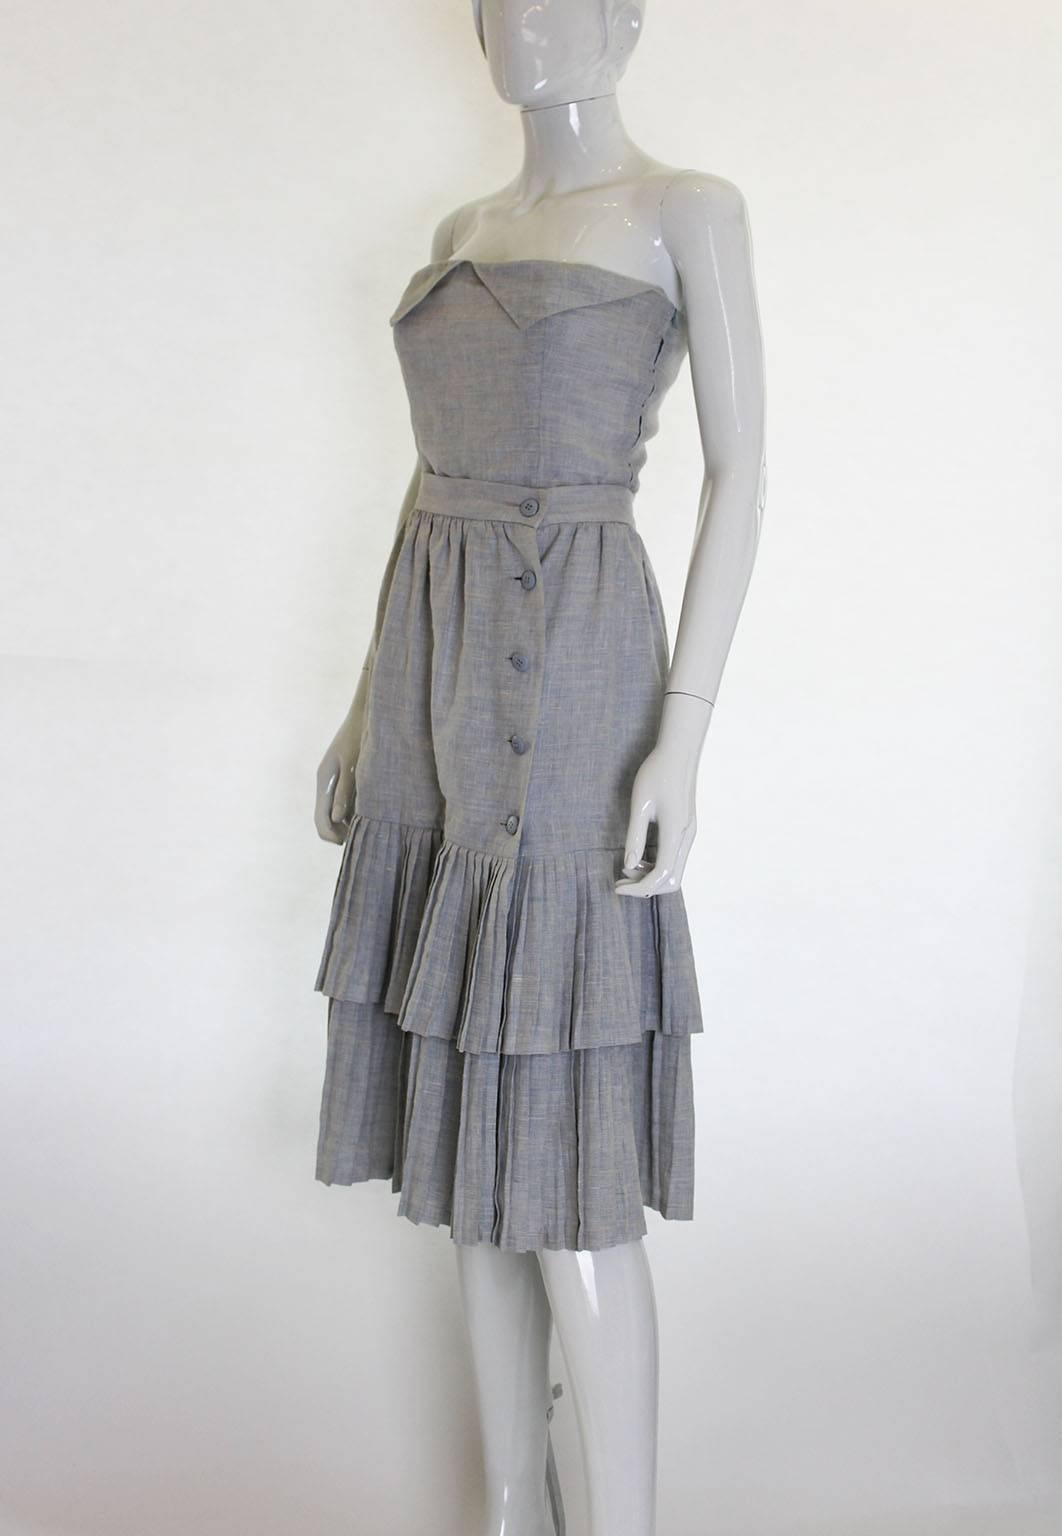 A super outfit for Summer, this Lanvin, Paris, skirt and bustier look wonderful together, but alternatively was be worn separately with other items.
The fabric is a silk and linen mix, in a charming blue and and white stripe.
The bustier is boned,